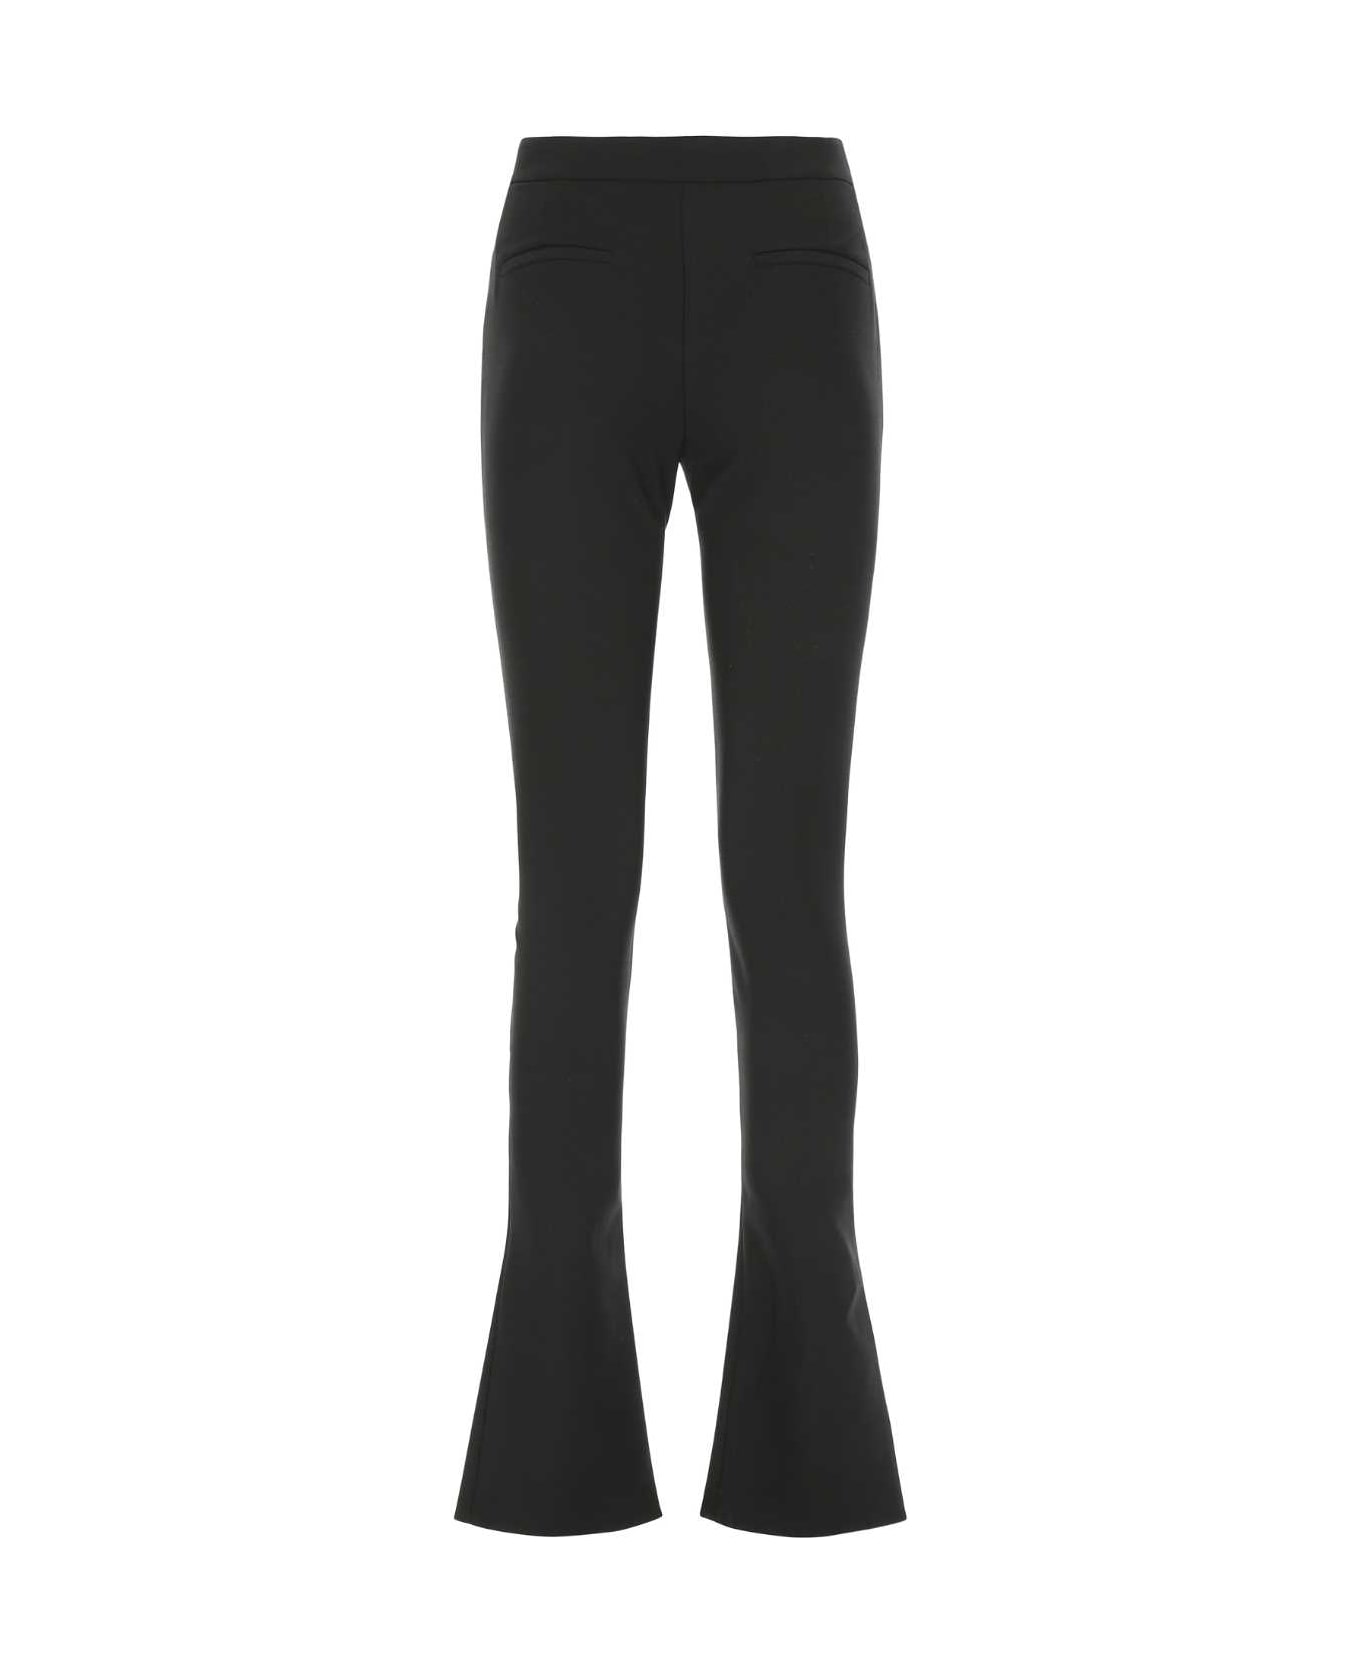 Off-White Black Stretch Polyester Blend Pant - 1001